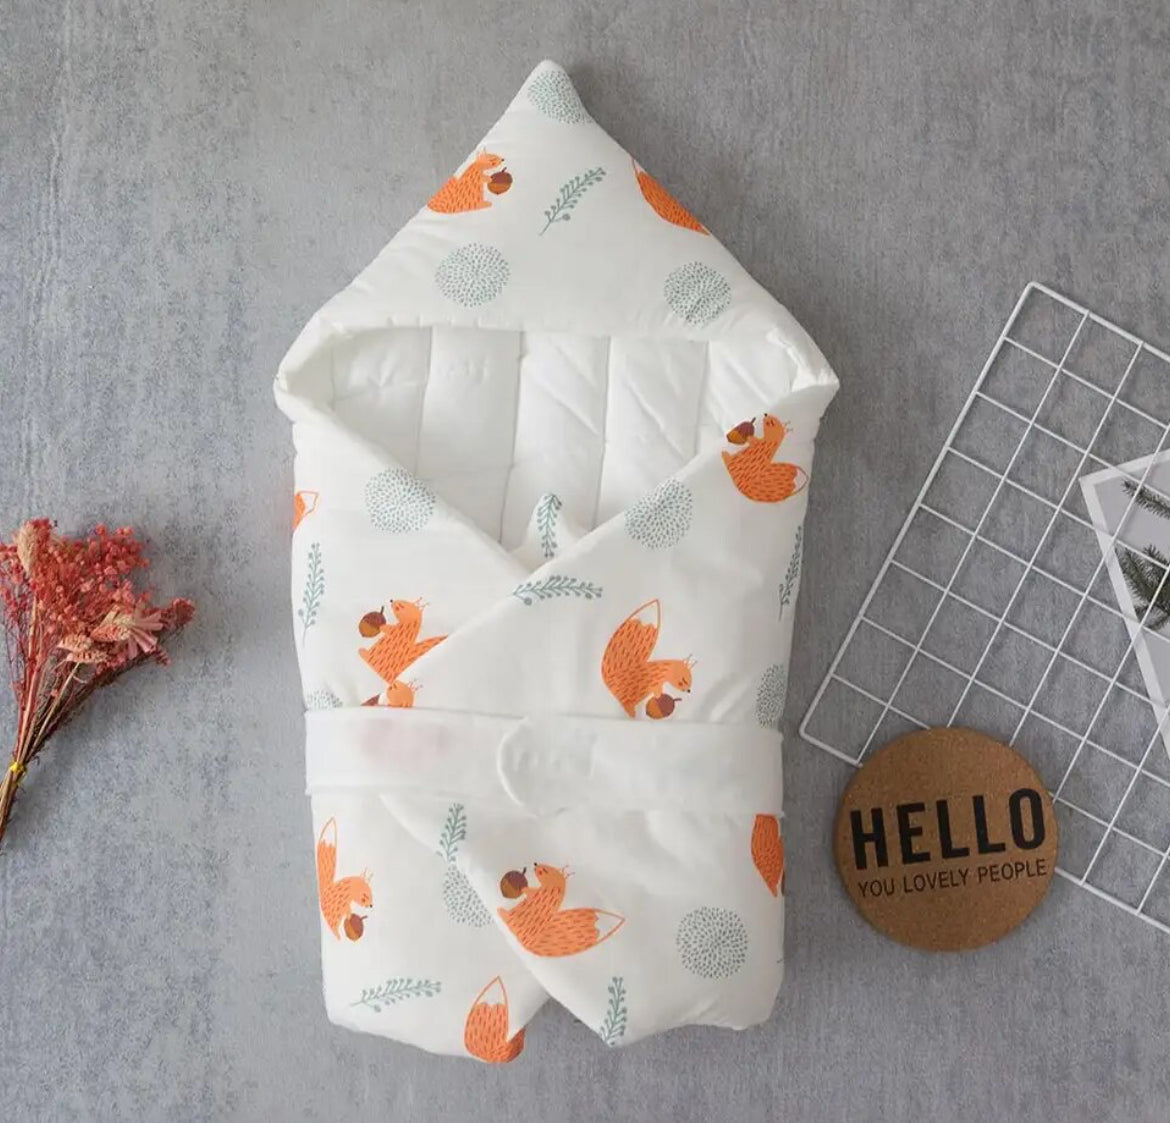 Baby Blanket Quilt Blanket For Discharge Newborn Baby Swaddle Wrap Cute Cartoon Shape 100% Cotton 80*80Cm Bedding Carriage Sack